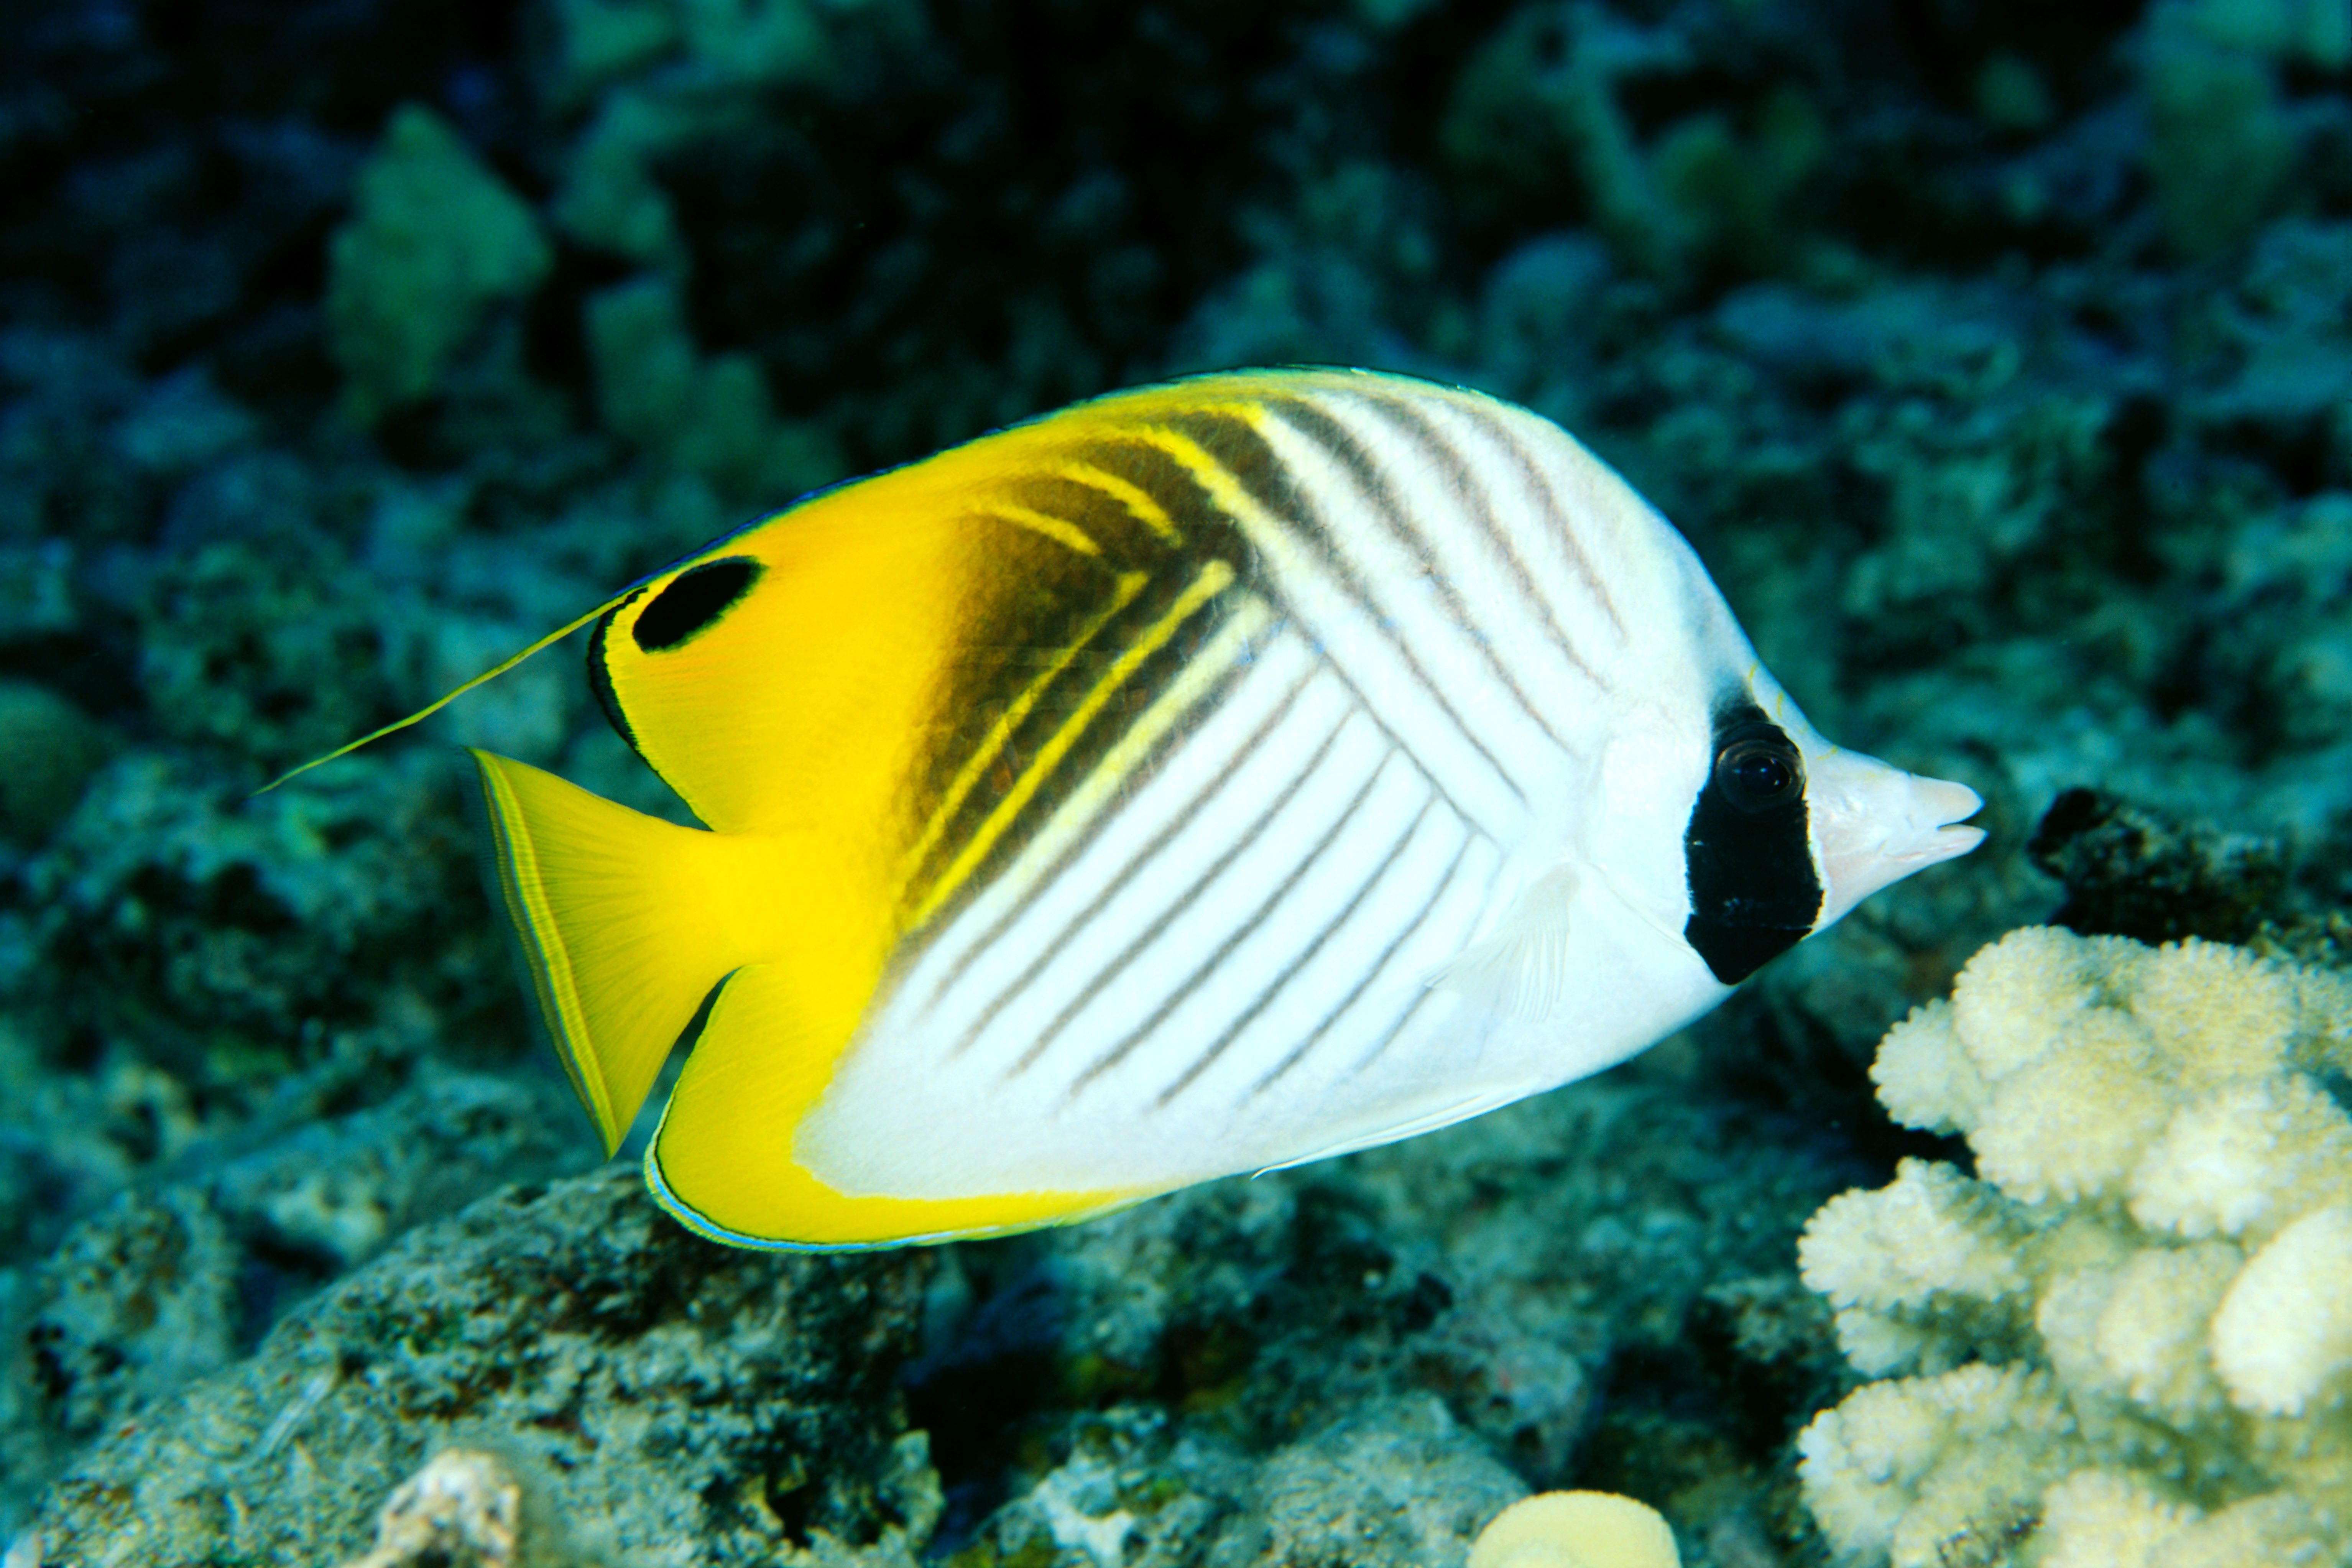 Side view of a single threadfin butterflyfish